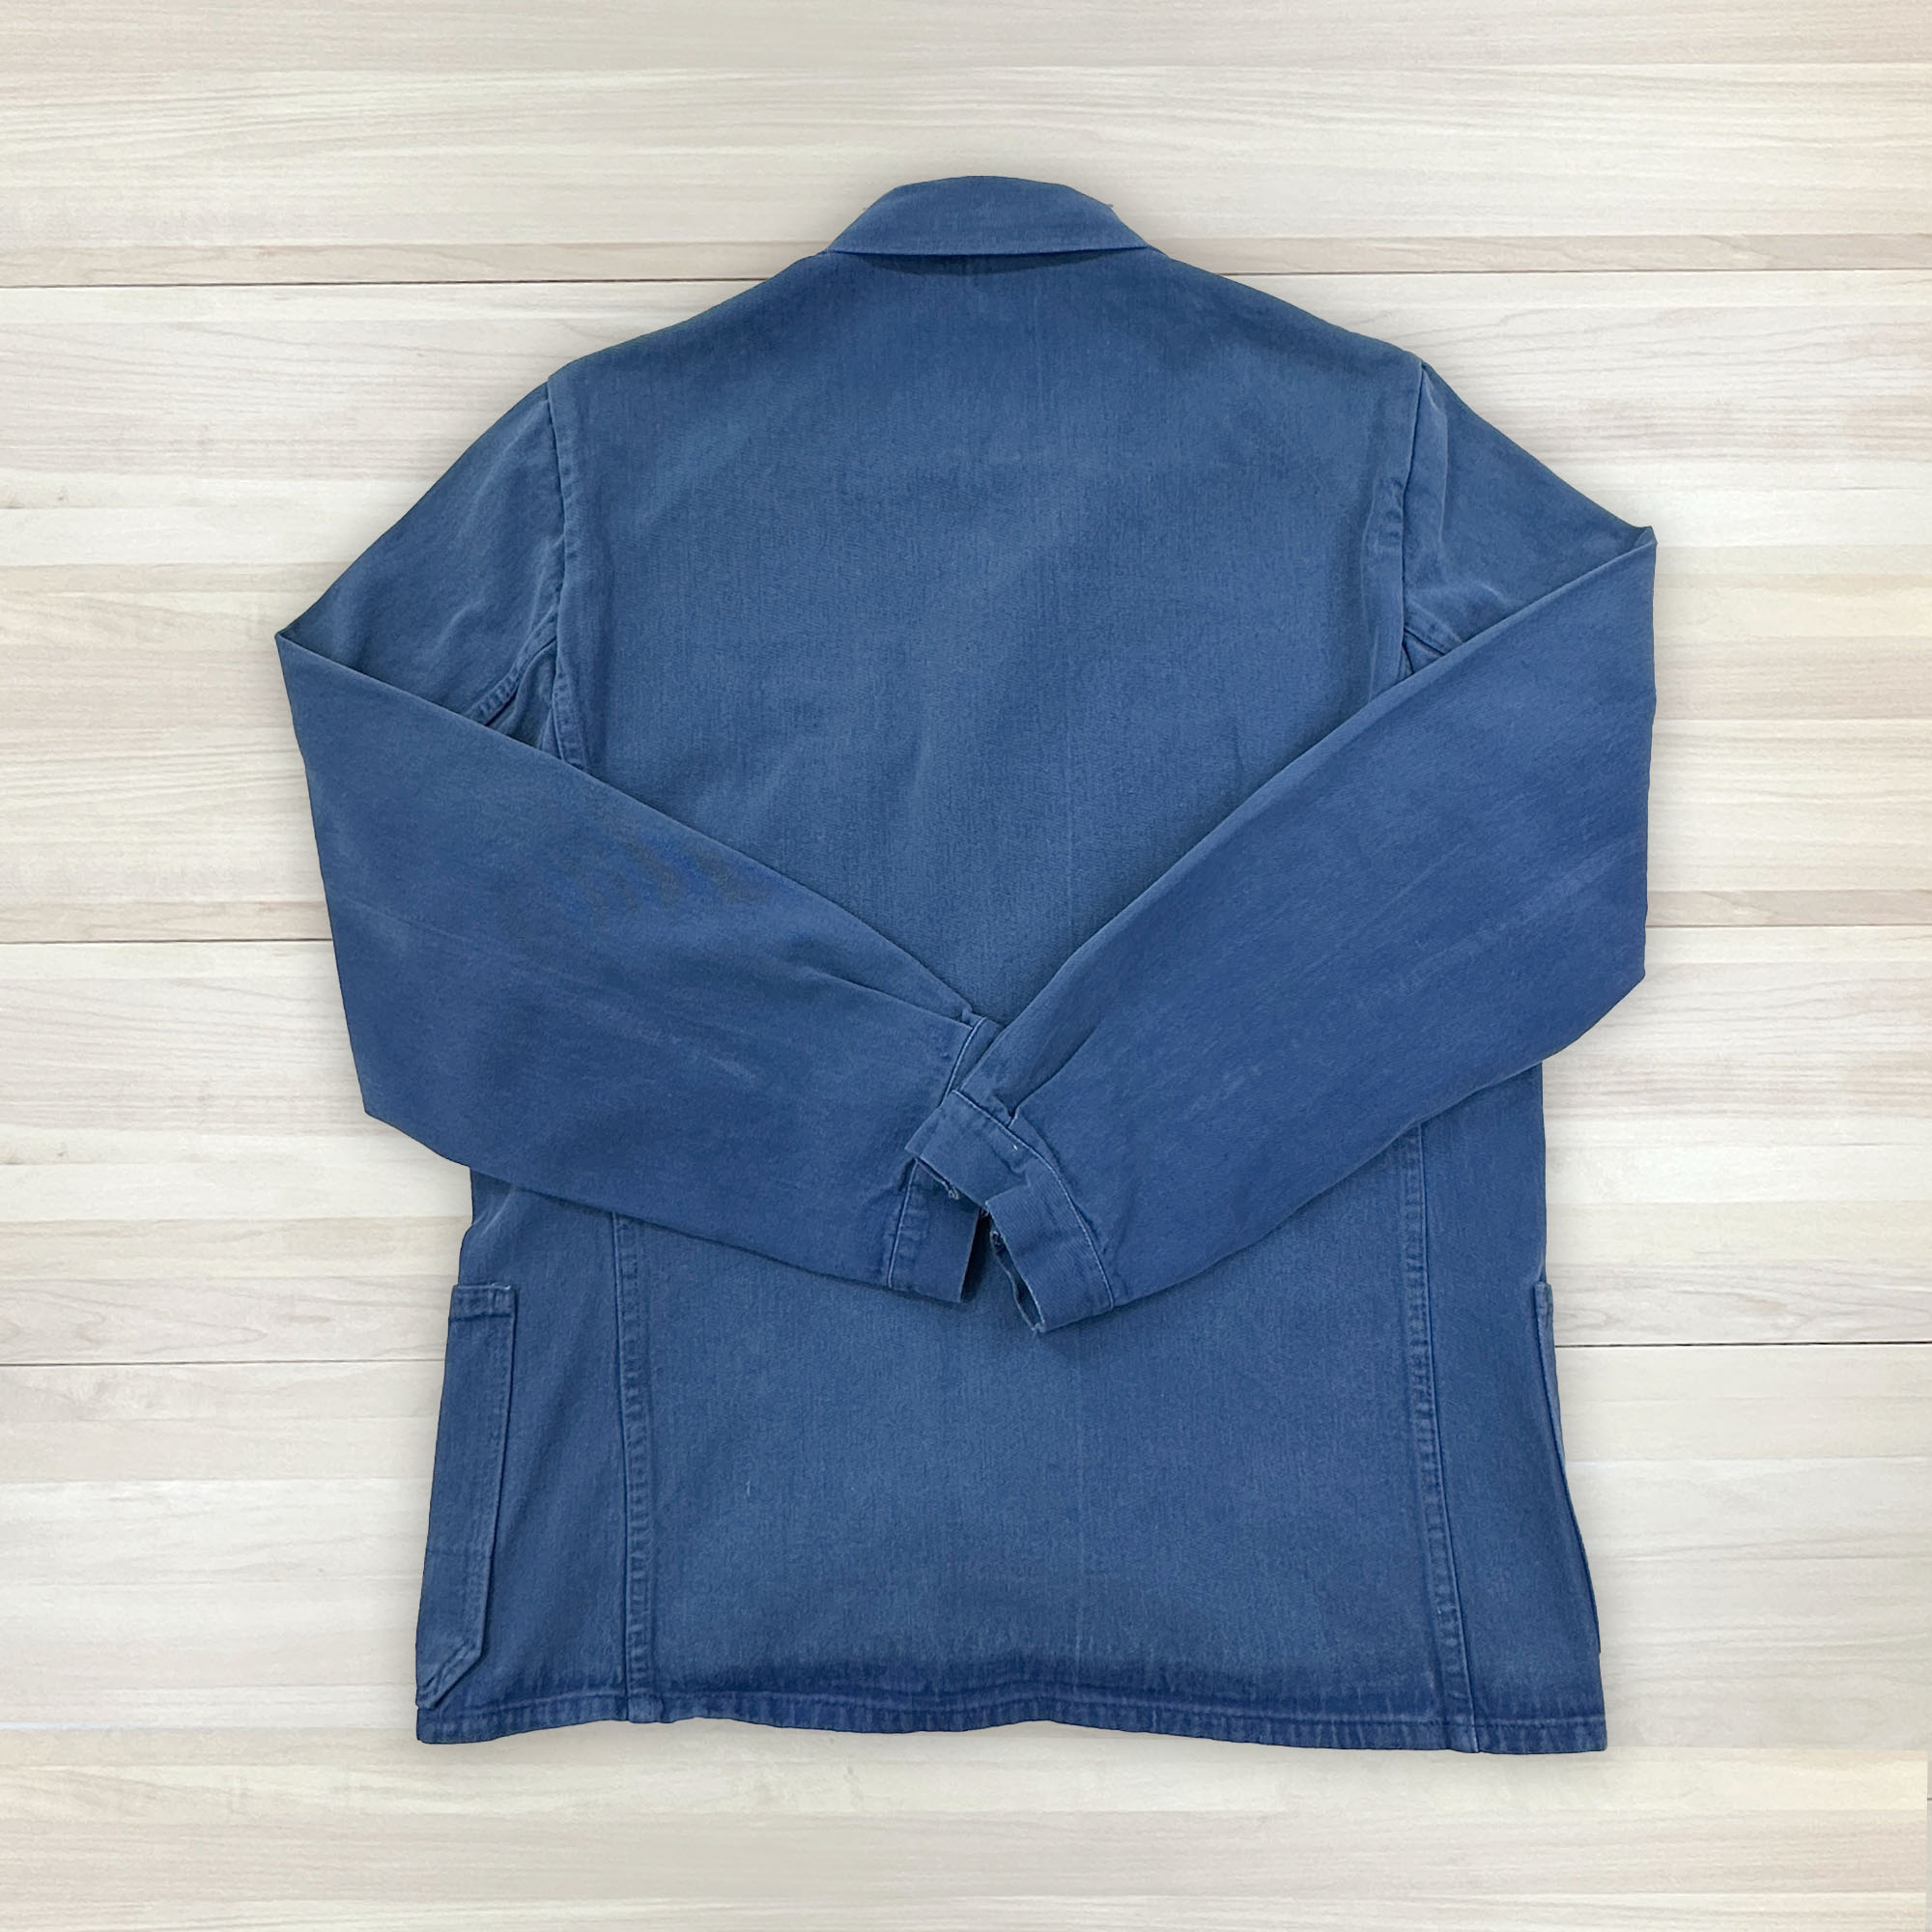 Vintage Blue French Chore Jacket - Women's Small